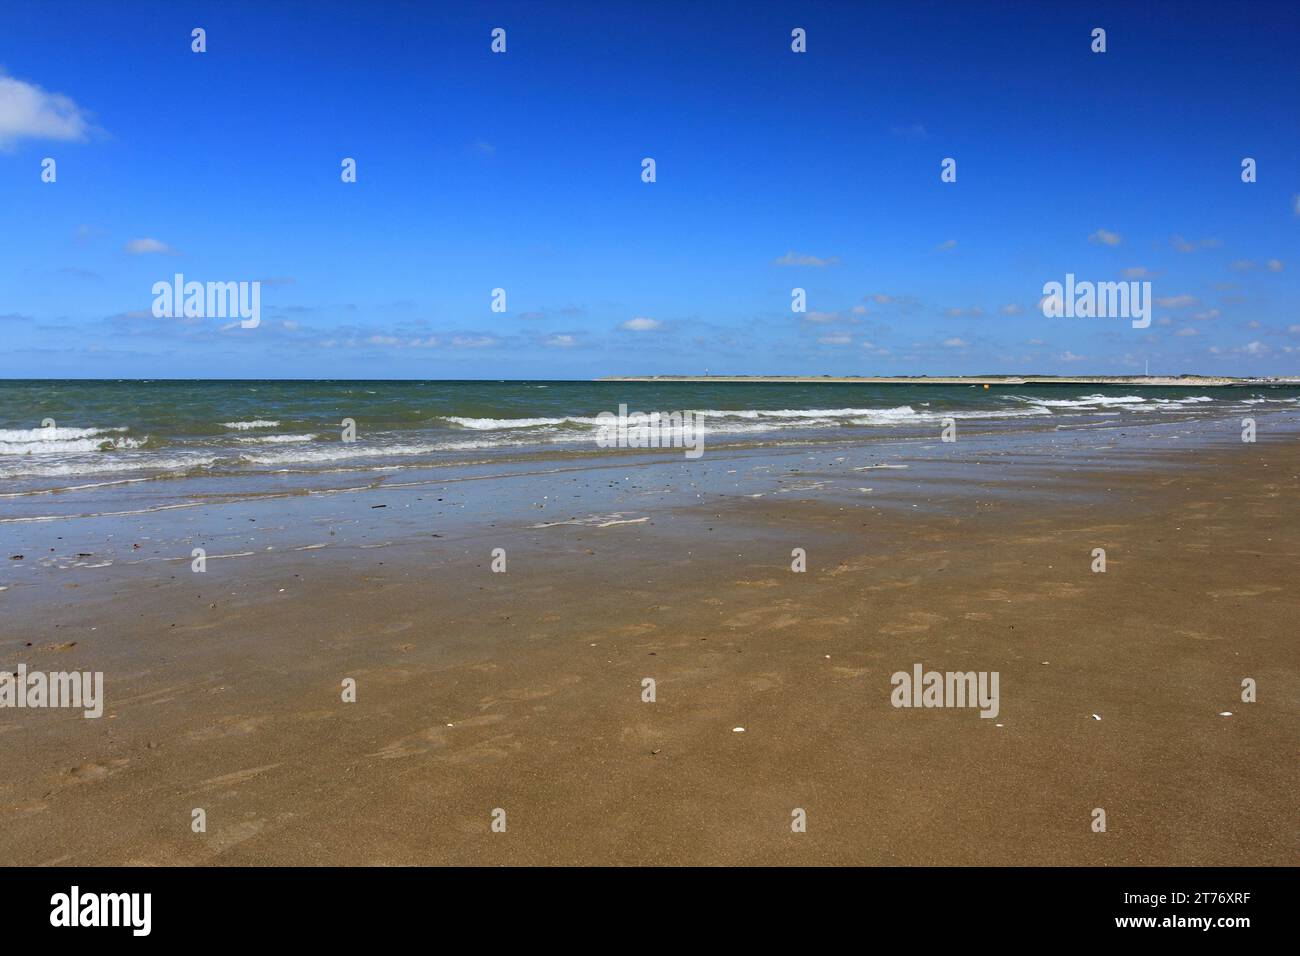 Waves with whitecaps flood the sandy beach,at the Netherlands Stock Photo